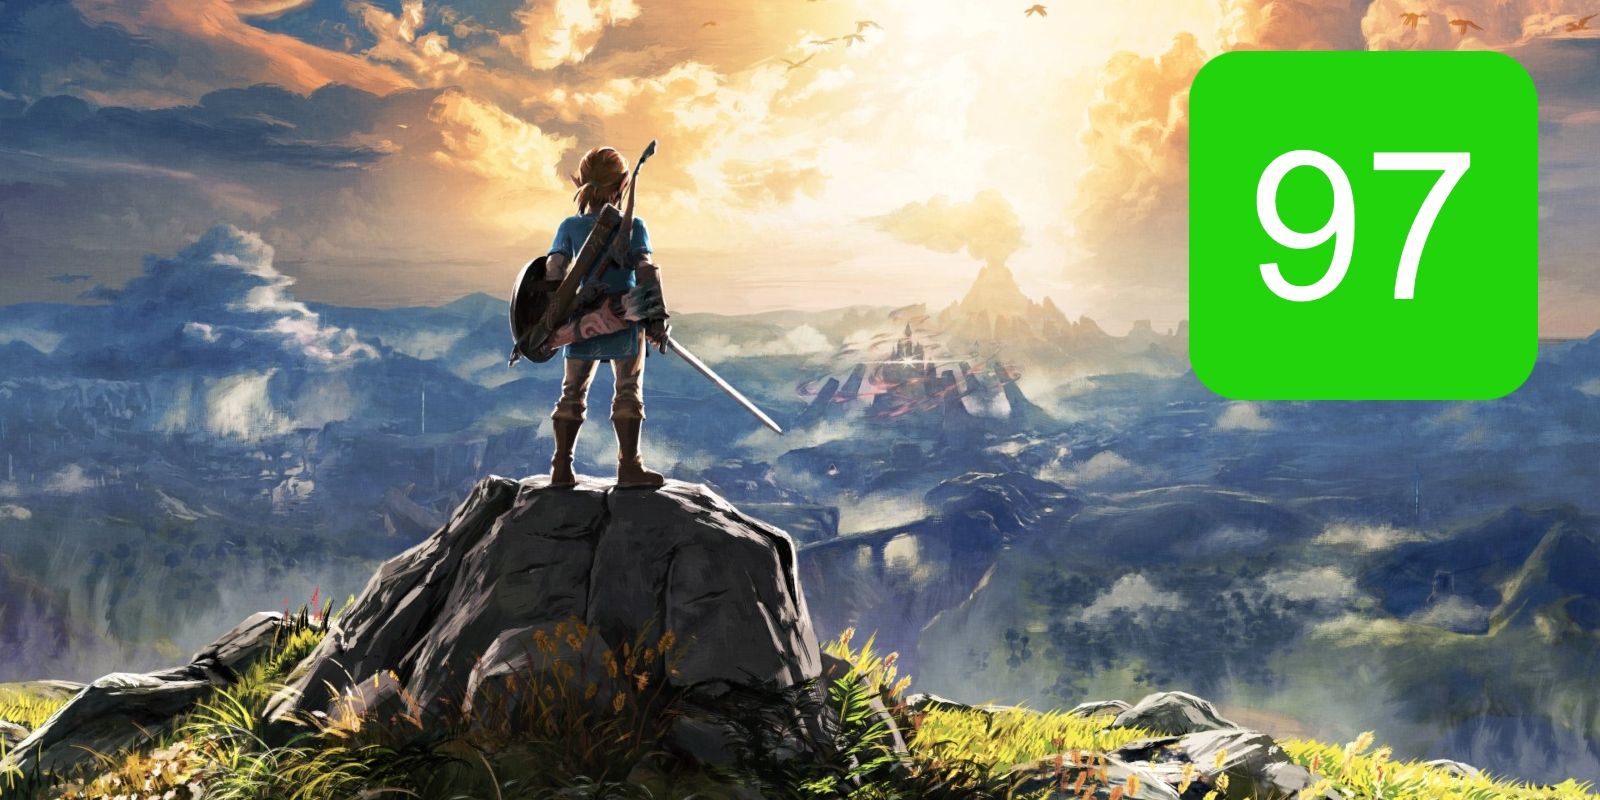 The Switch Metascore for Breath Of The Wild